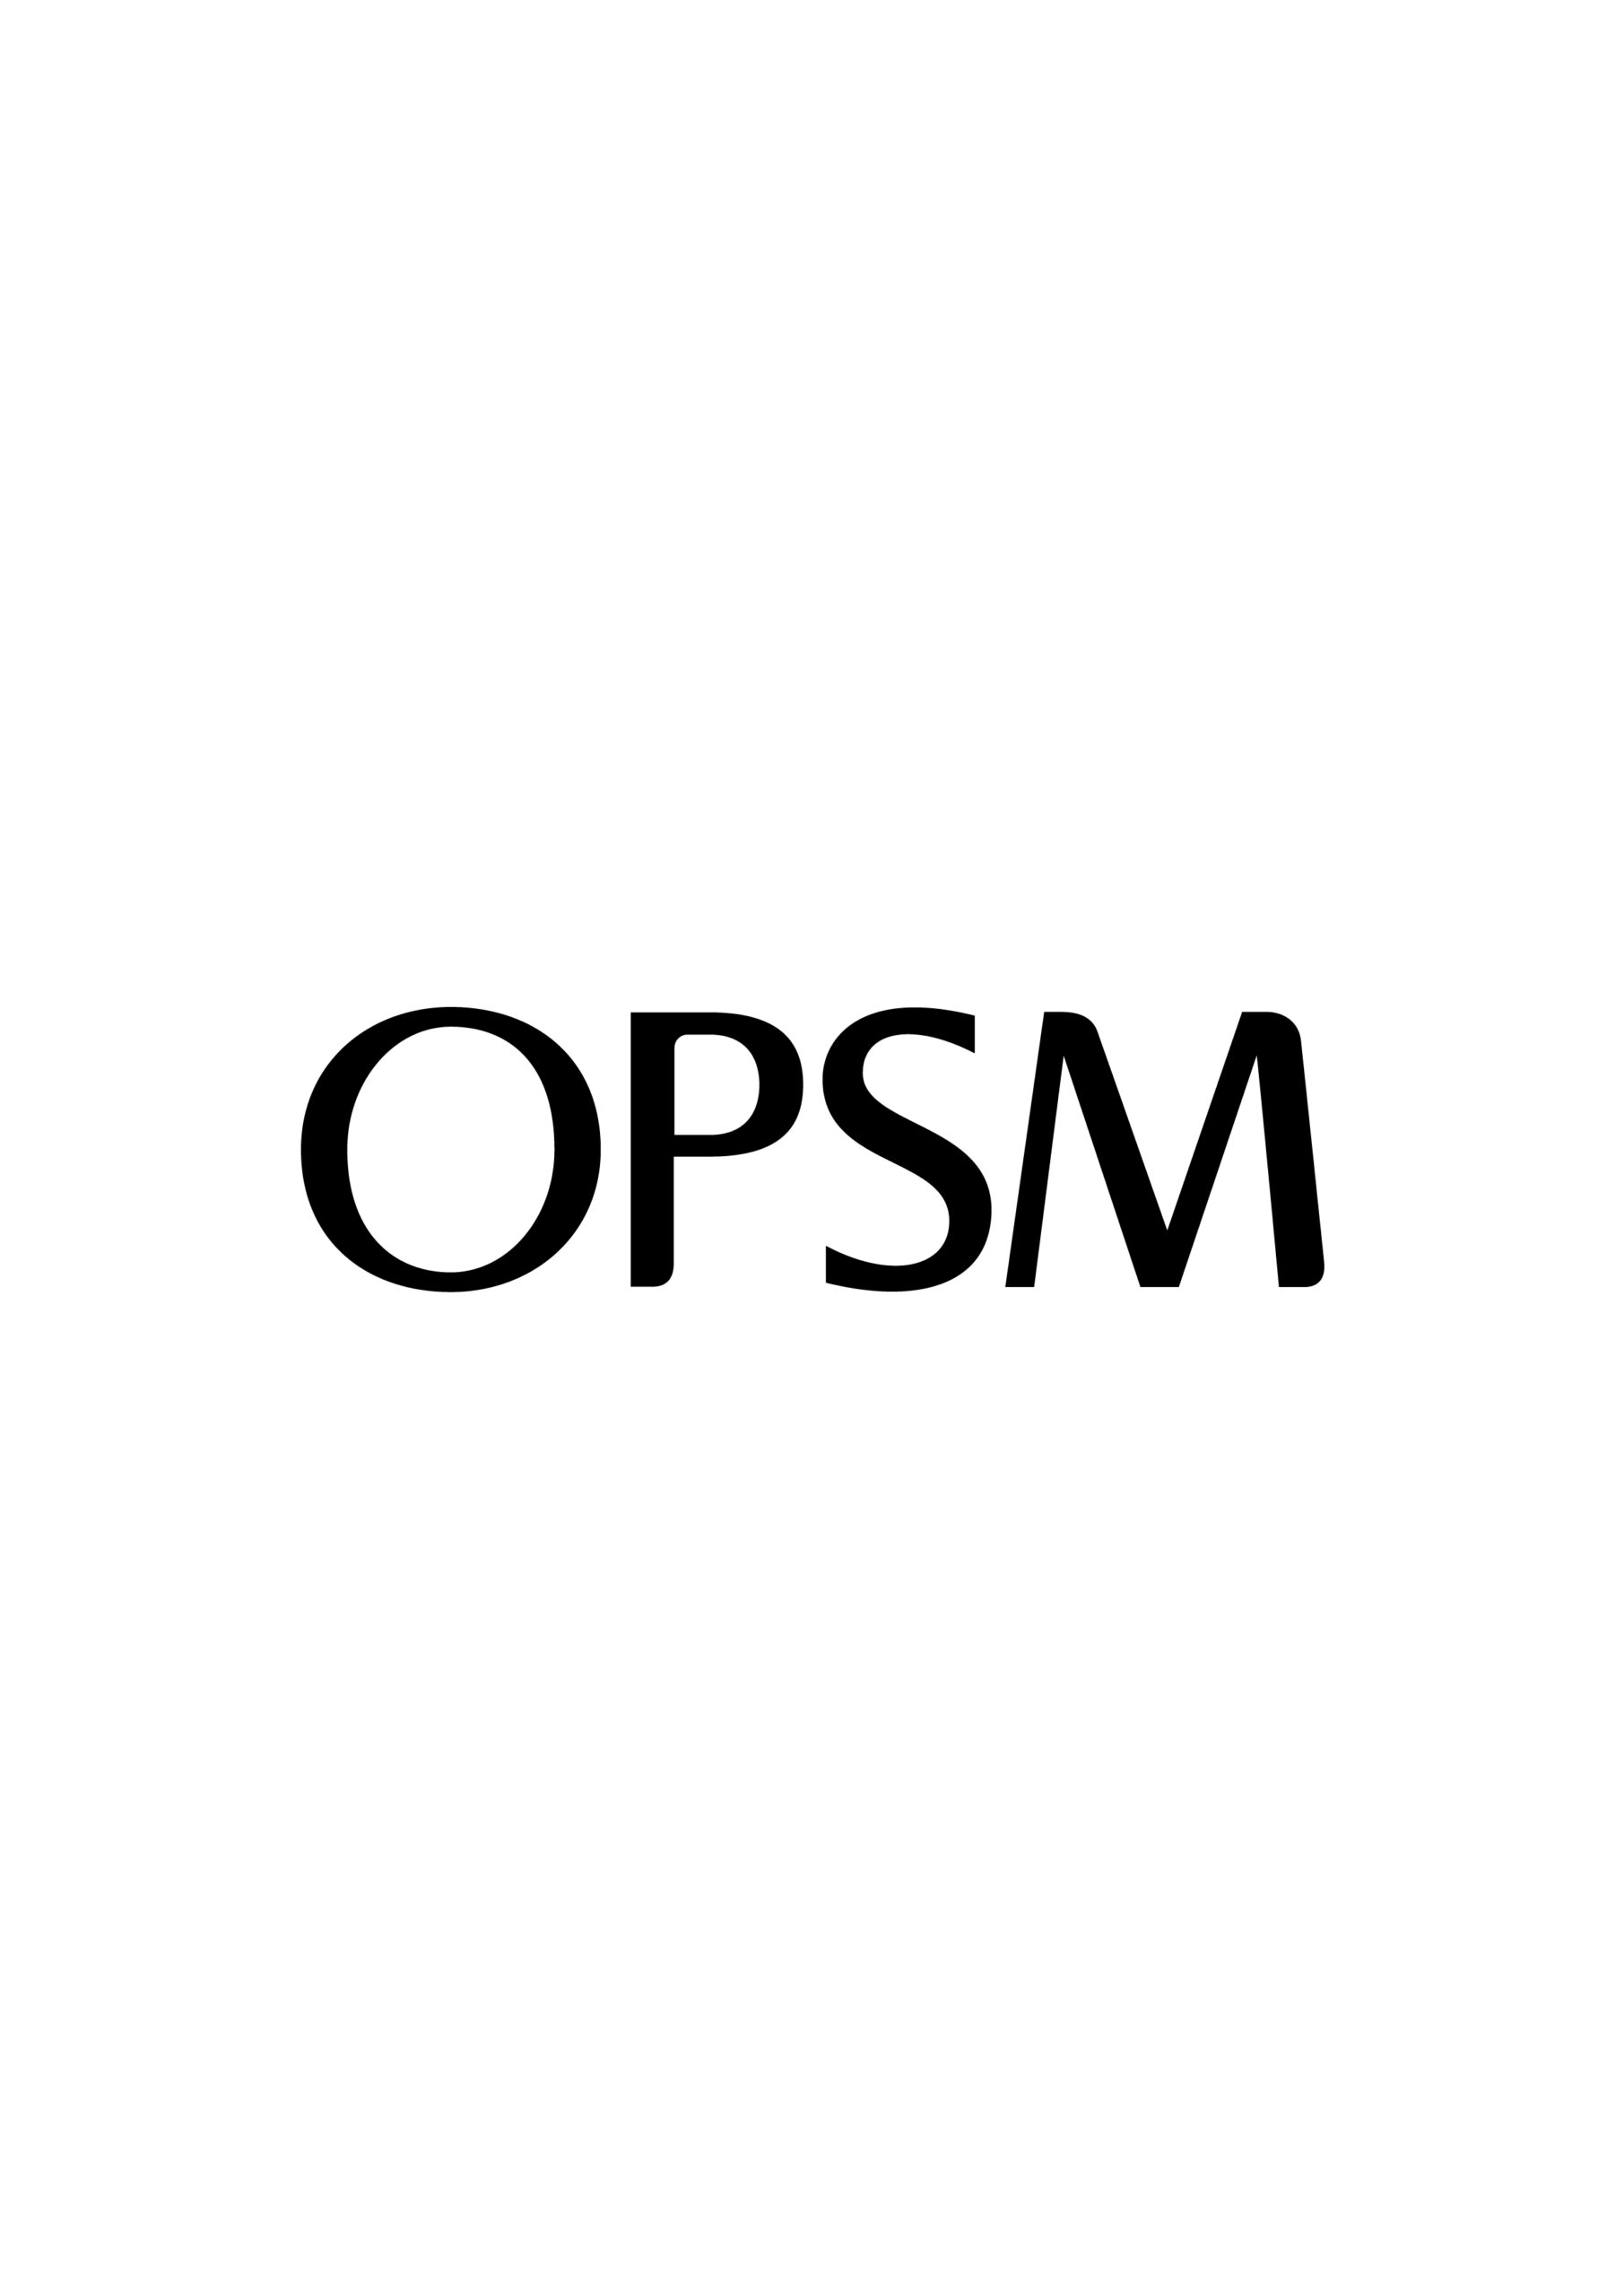 Get 20% off lenses and selected brands* at OPSM